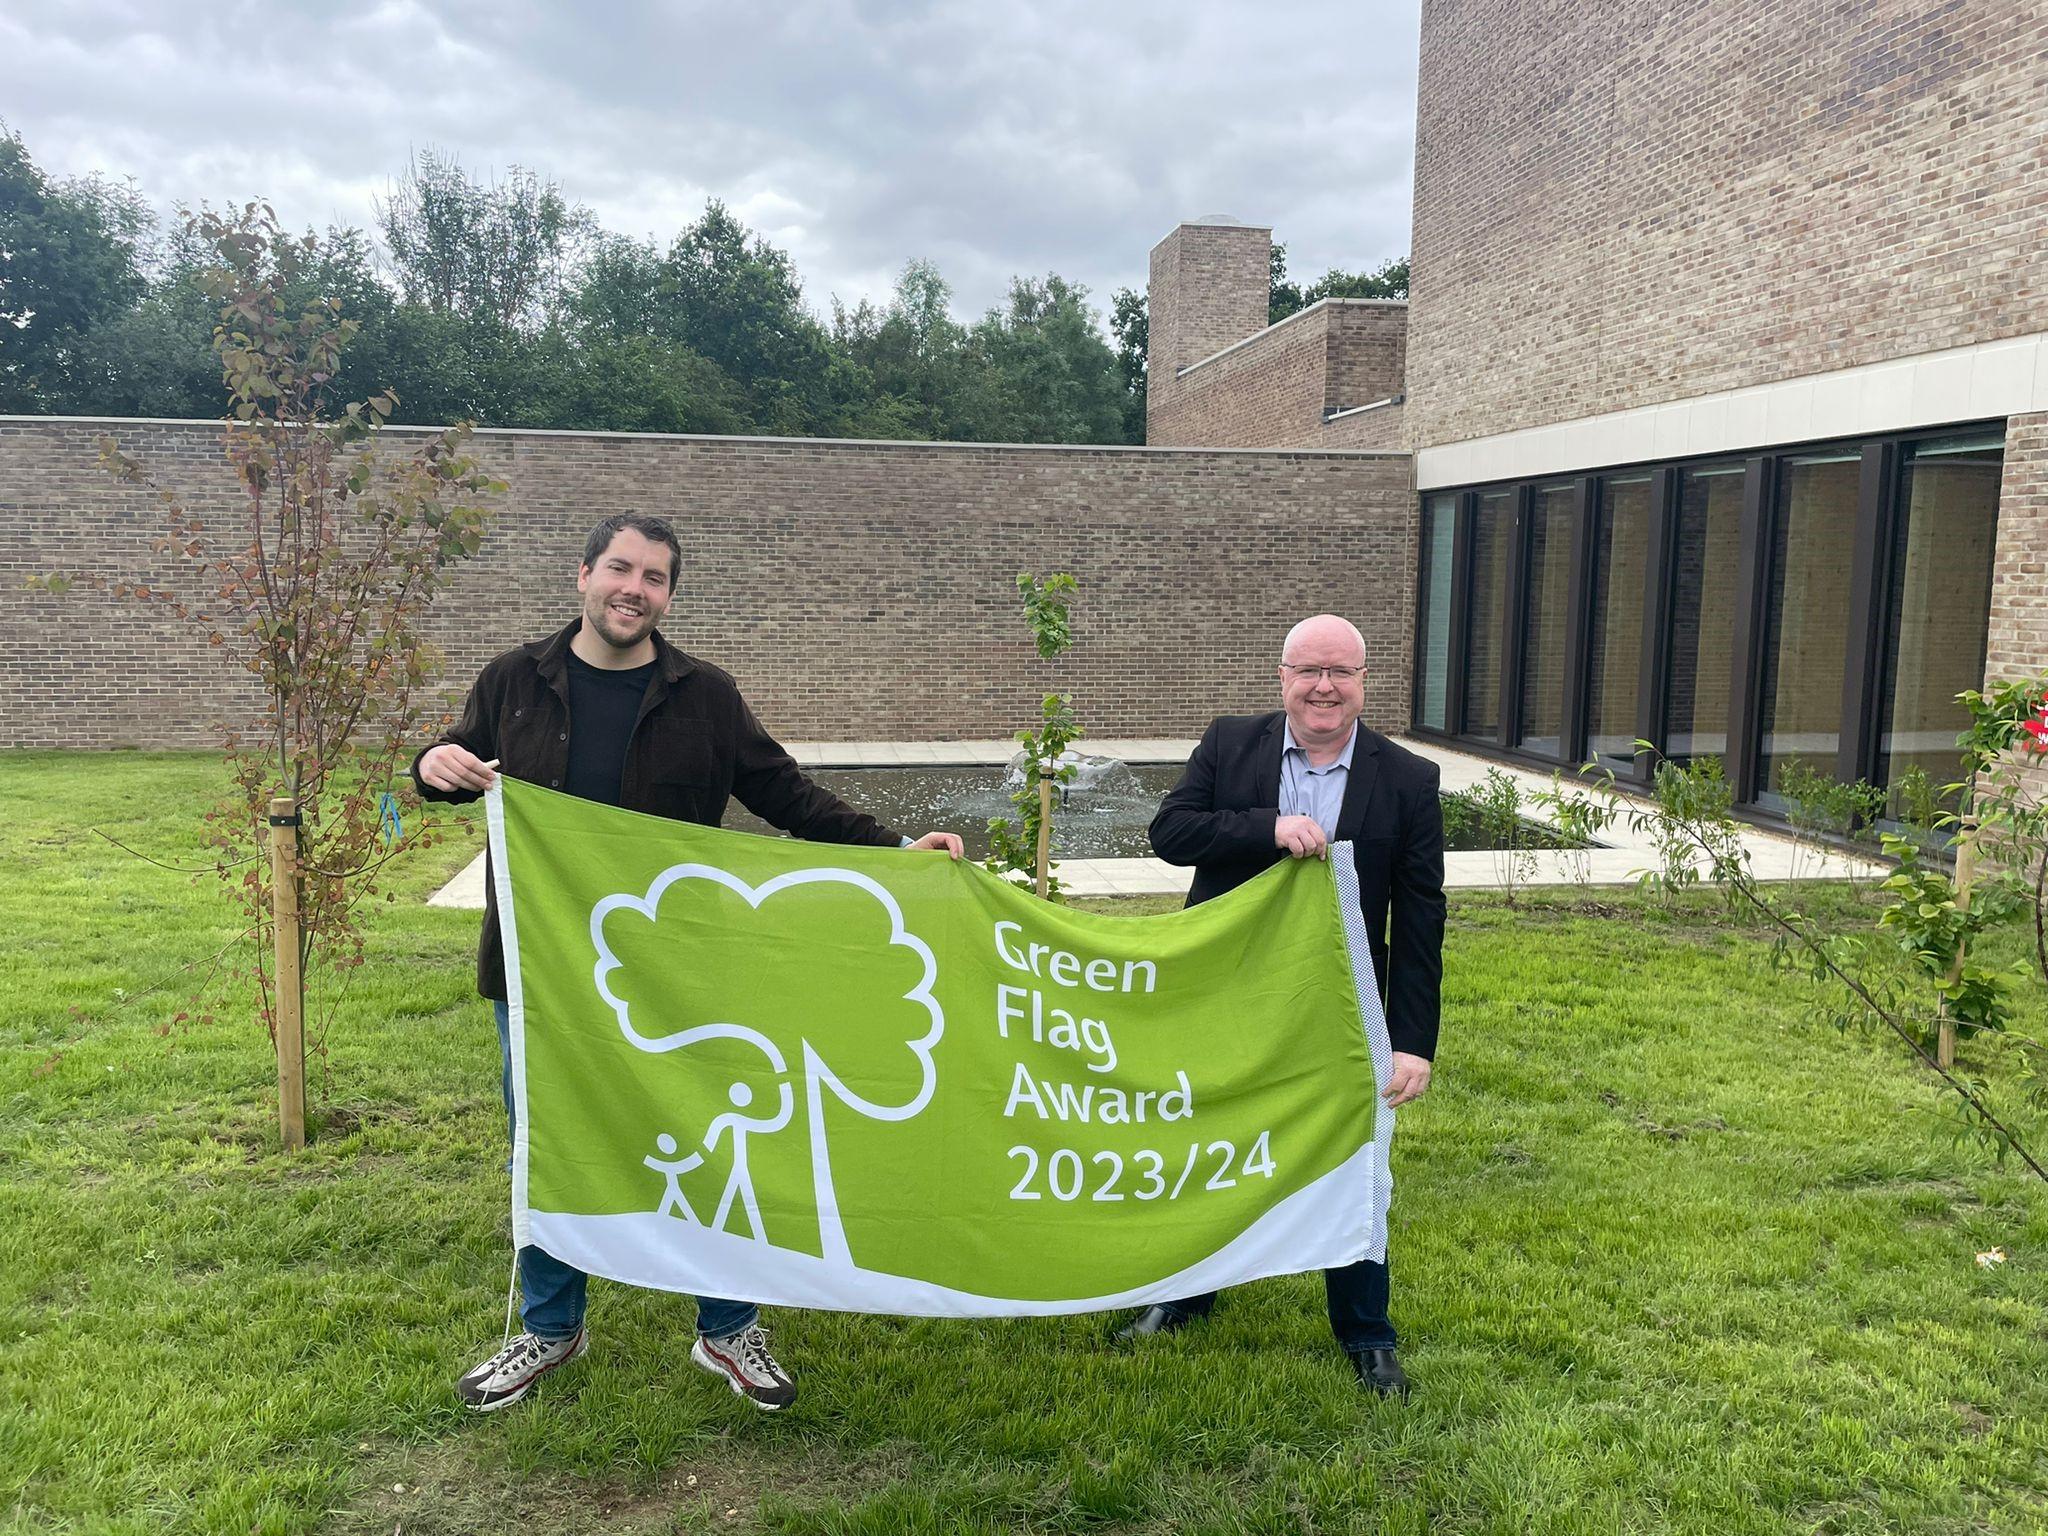 Two men holding up a large green flag.